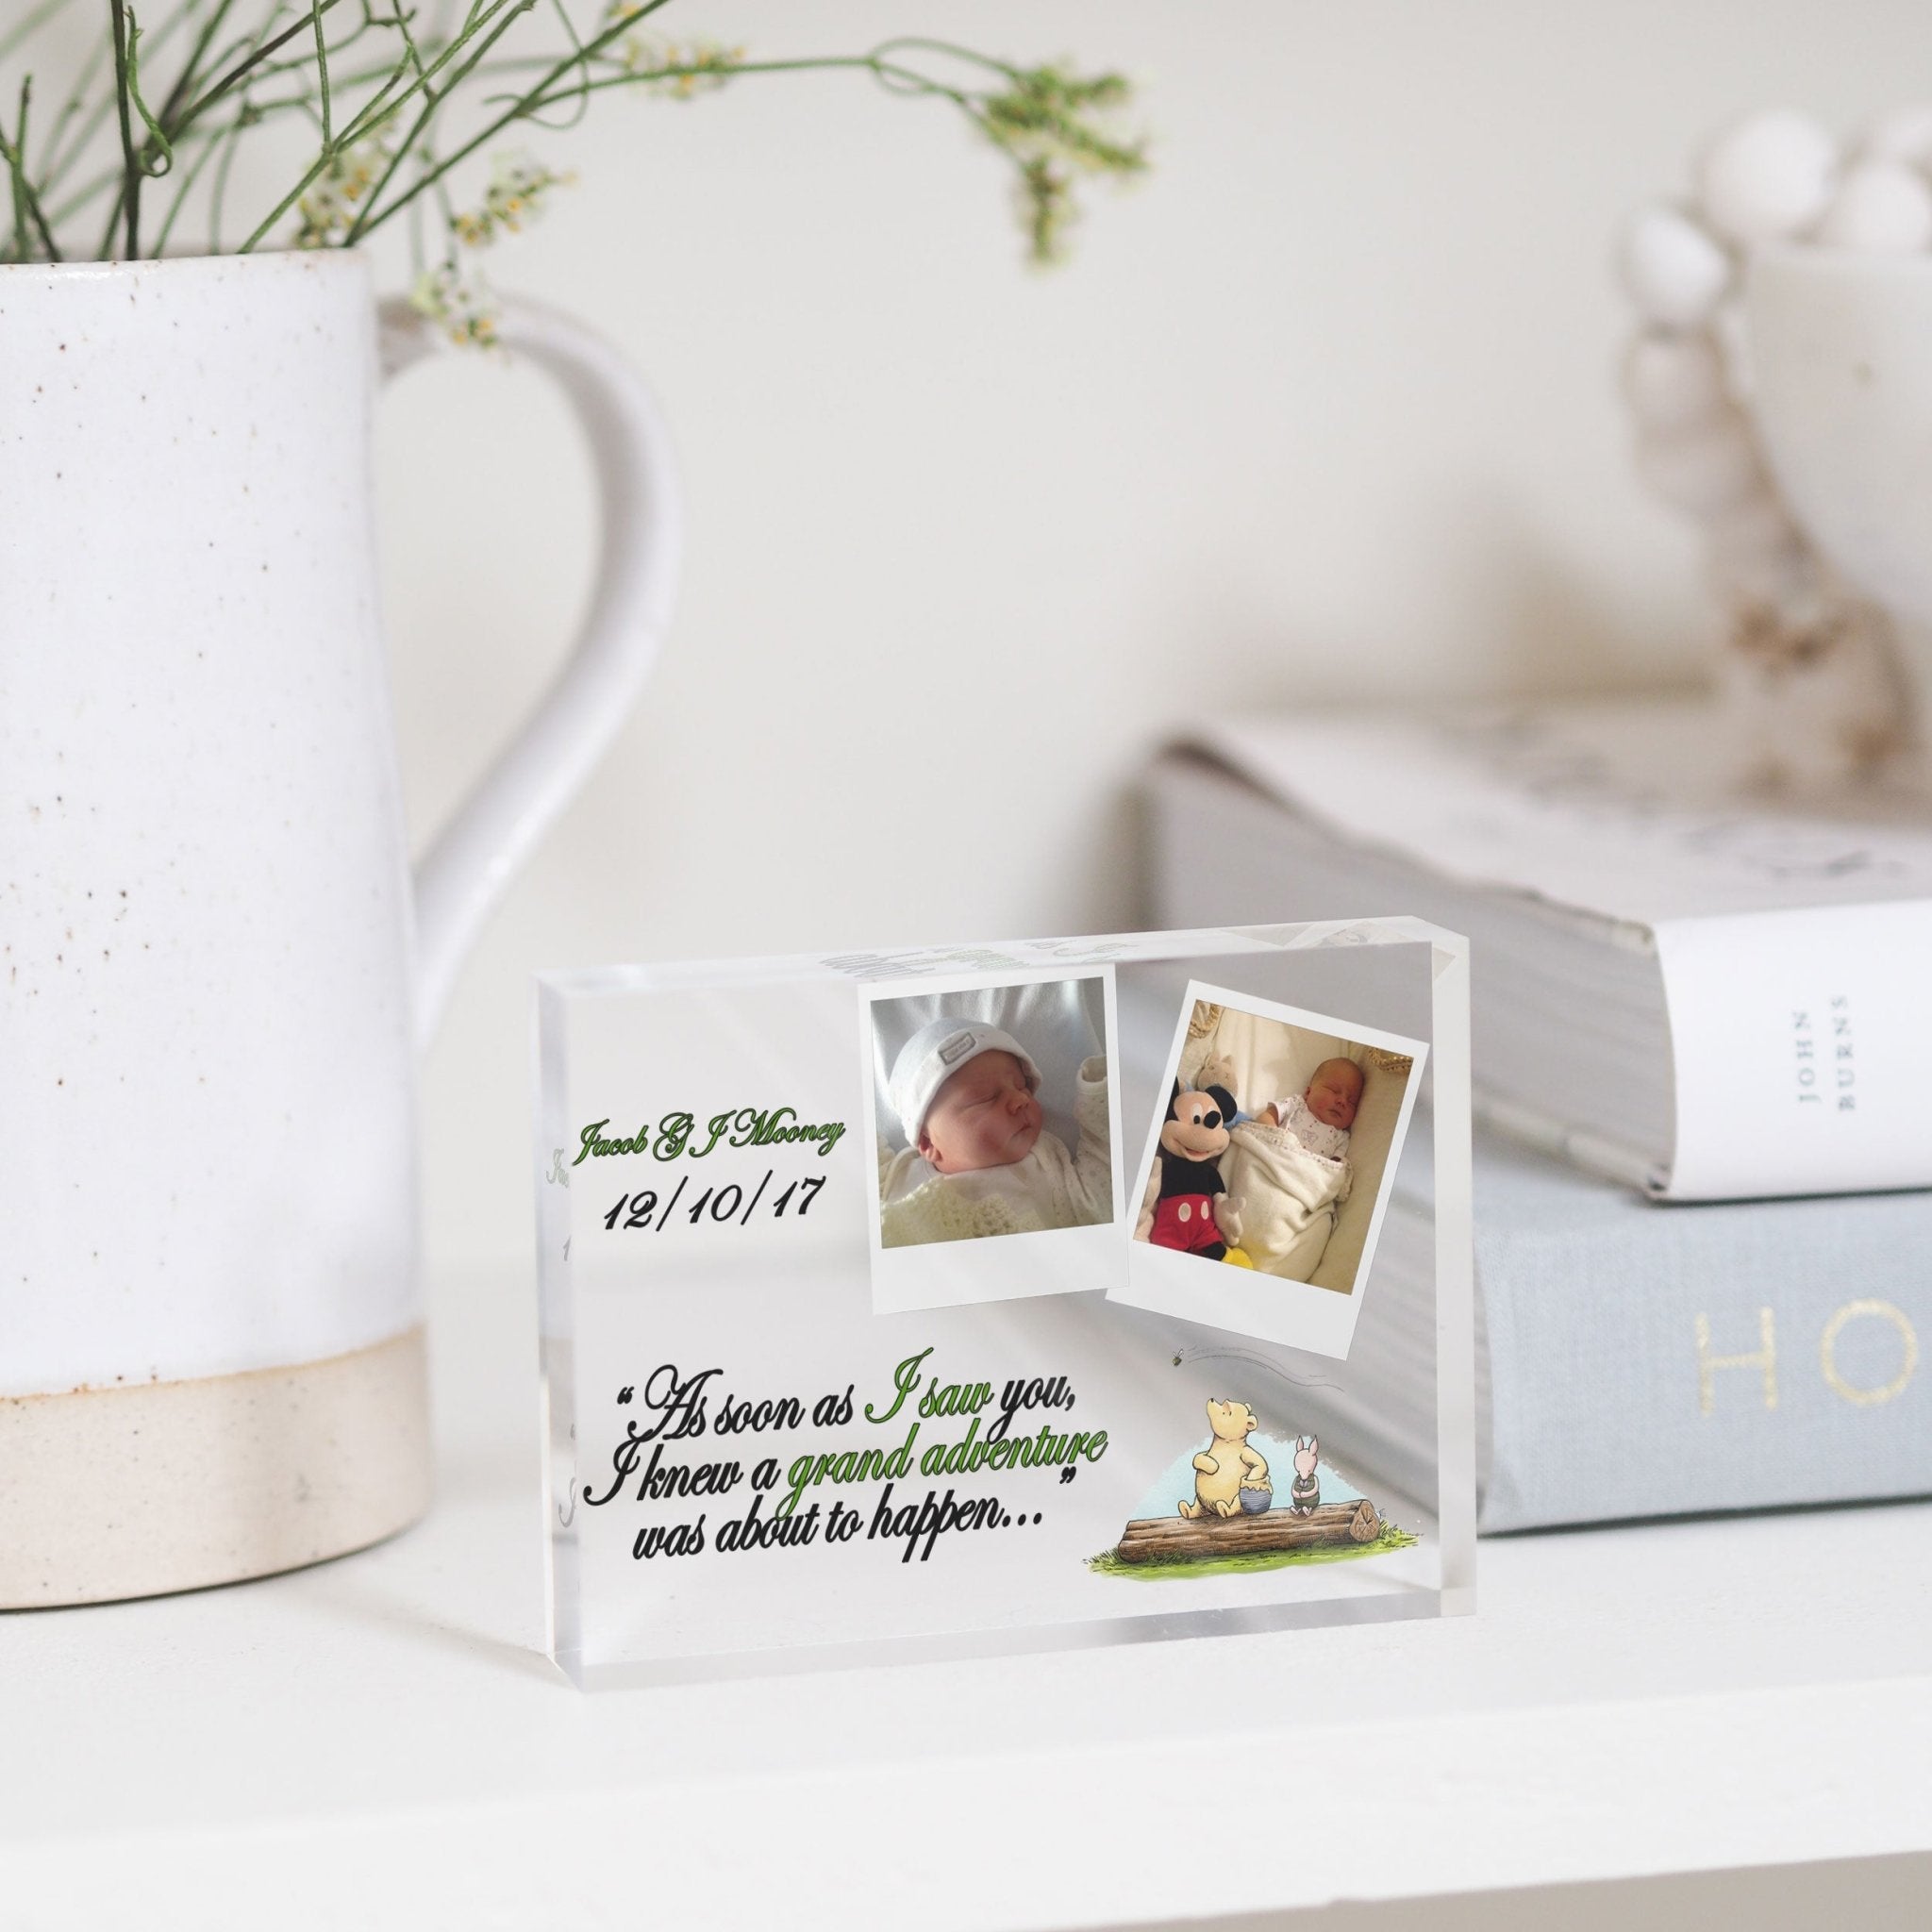 Winnie The Pooh Baby Shower Picture Frame Gift | Winnie The Pooh Nursery Quotes Baby Gifts PhotoBlock - Unique Prints